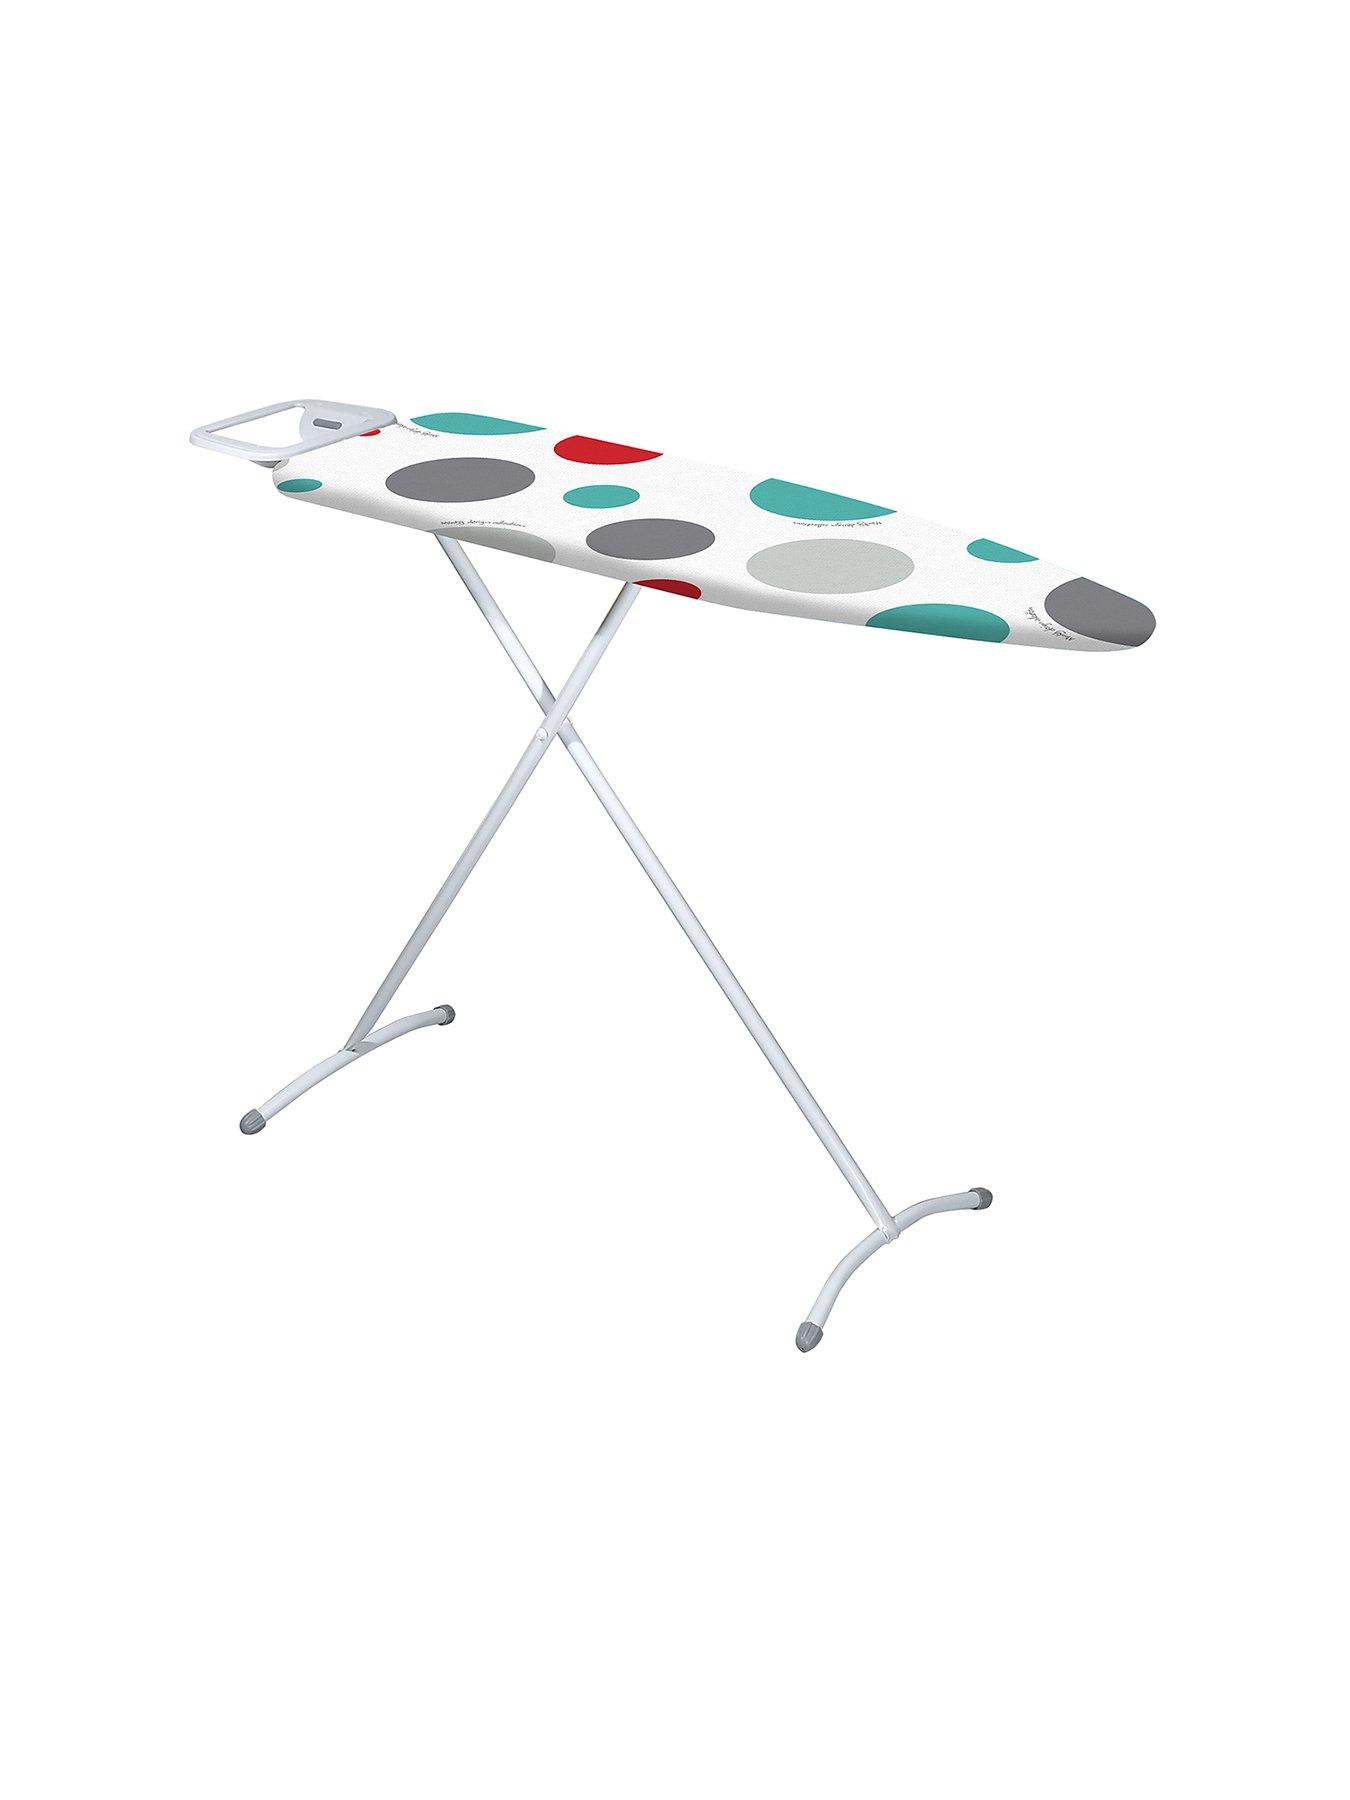 Details about   Adjustable Ironing Board Folding Wide Extra Large Heavy Duty Sturdy Foldable 